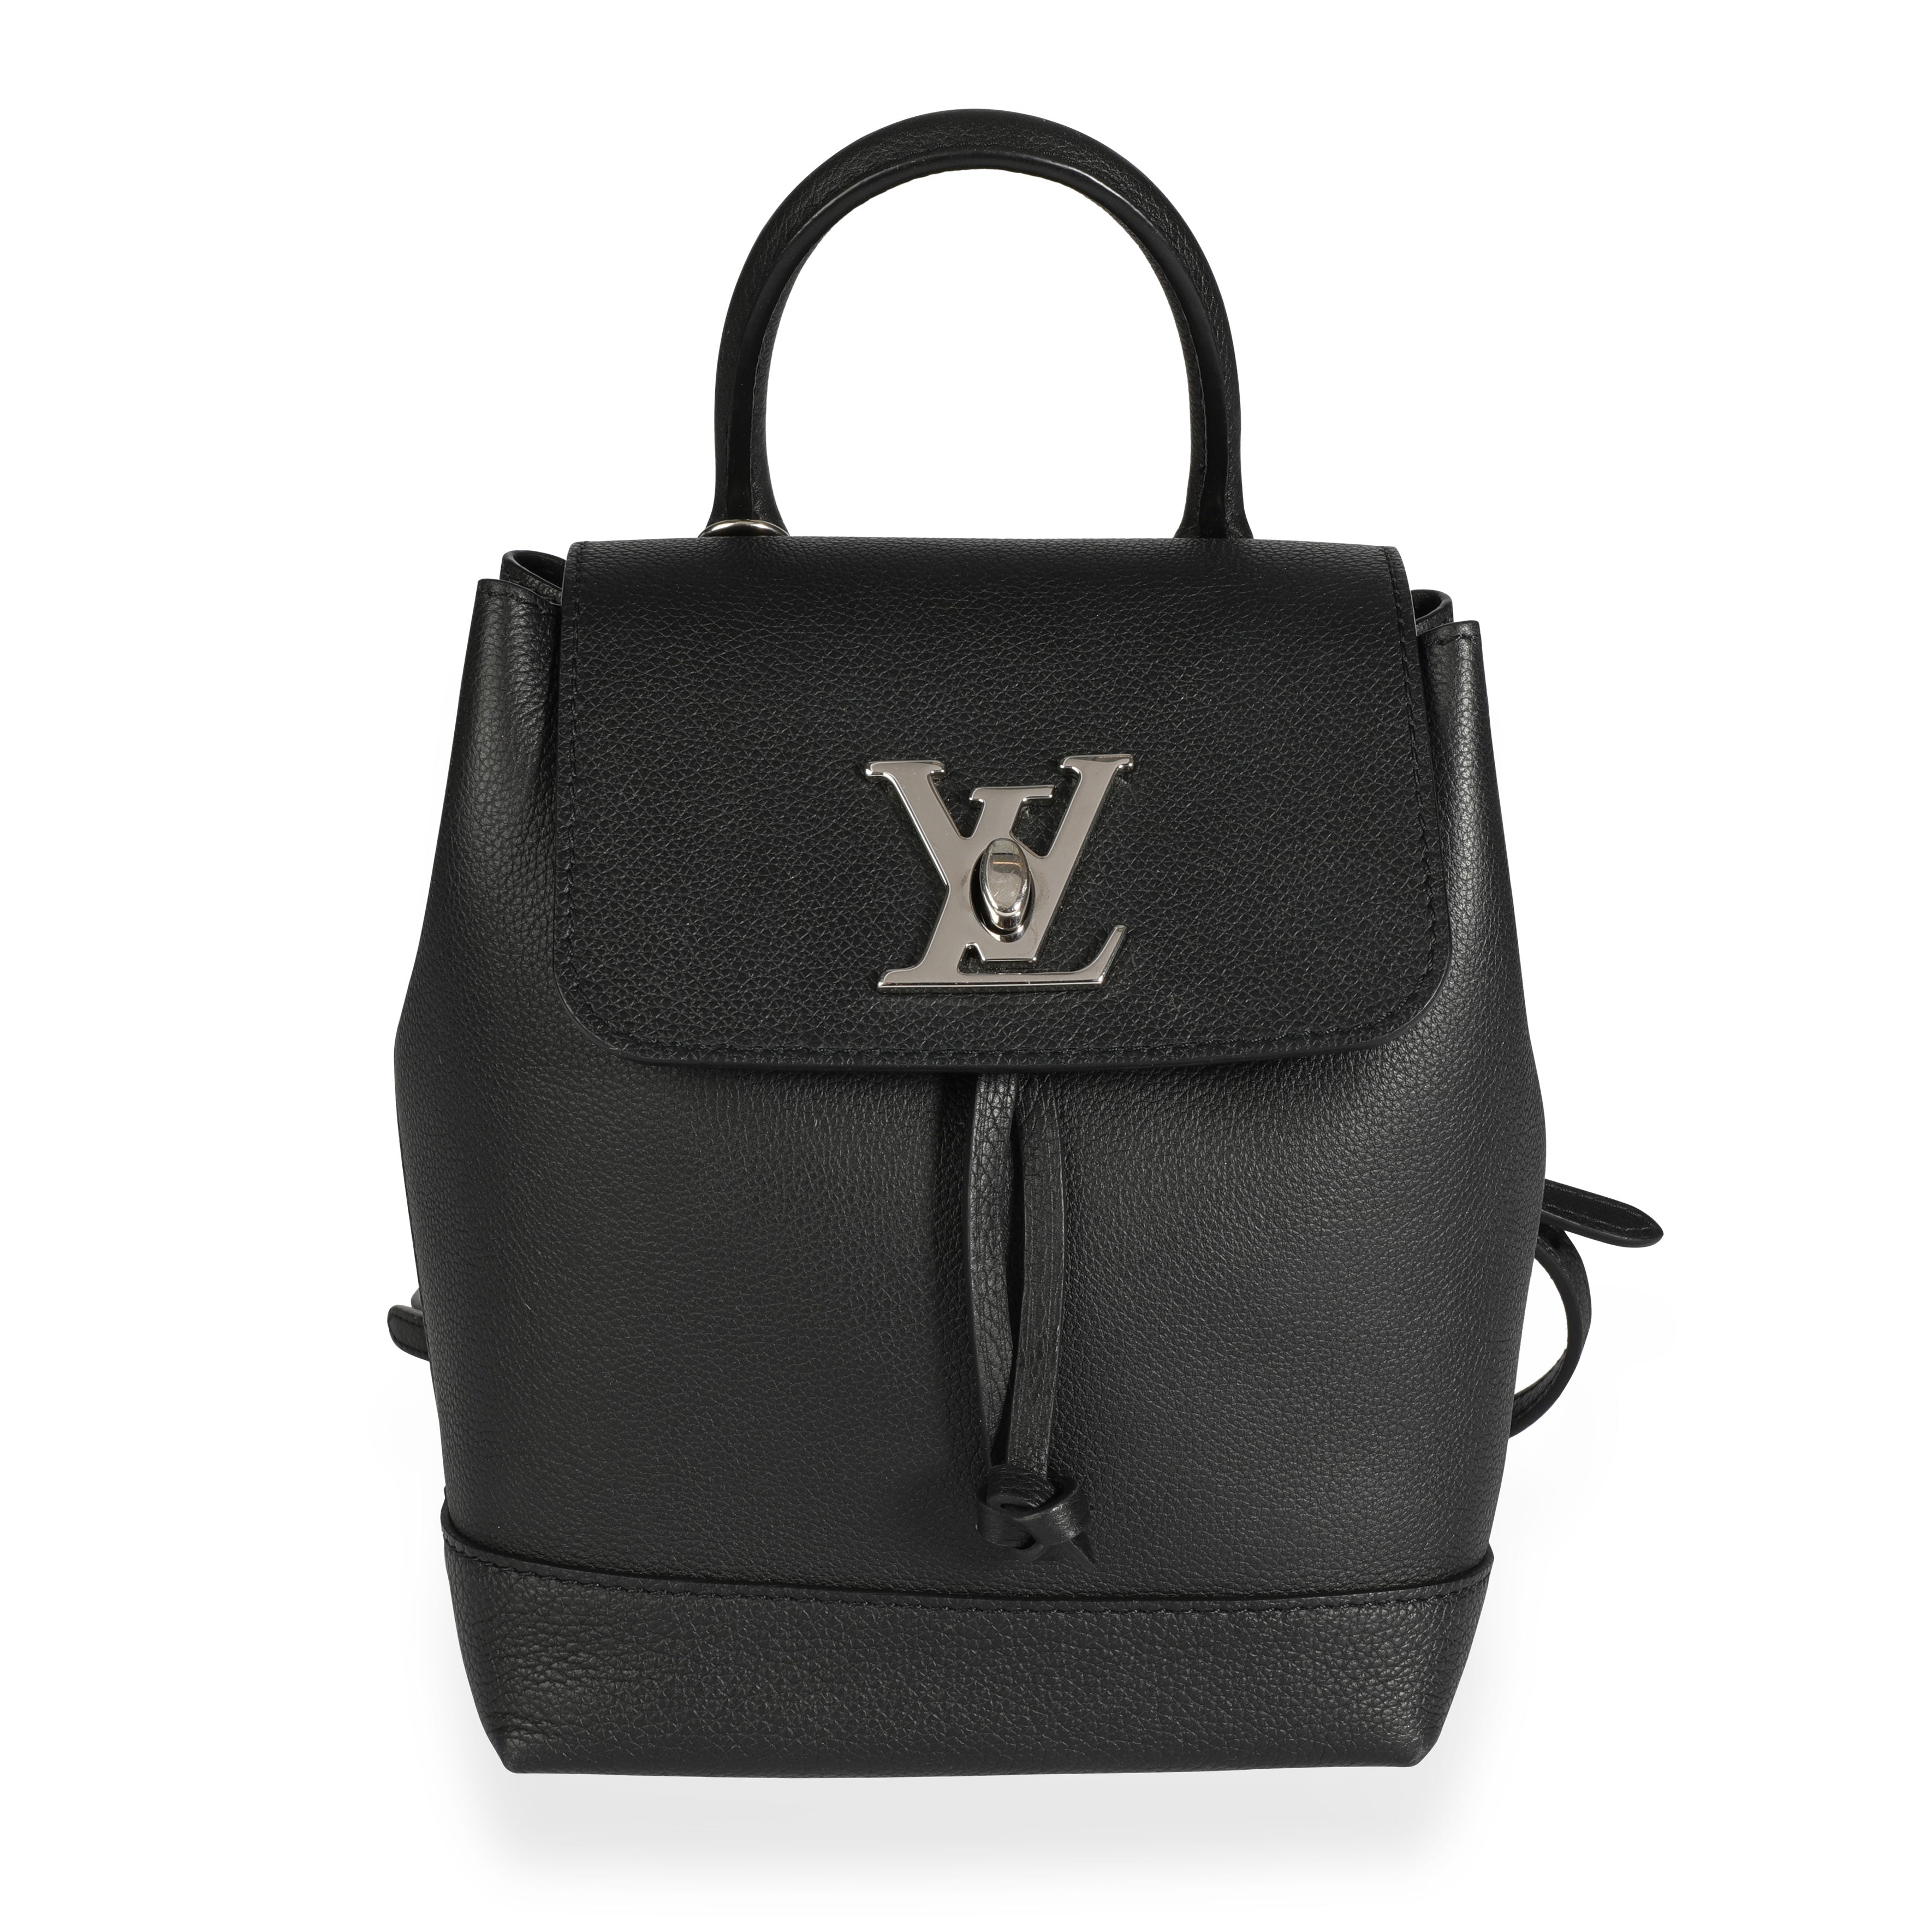 Authentic Louis Vuitton Lockme Mini Backpack Black with Gold